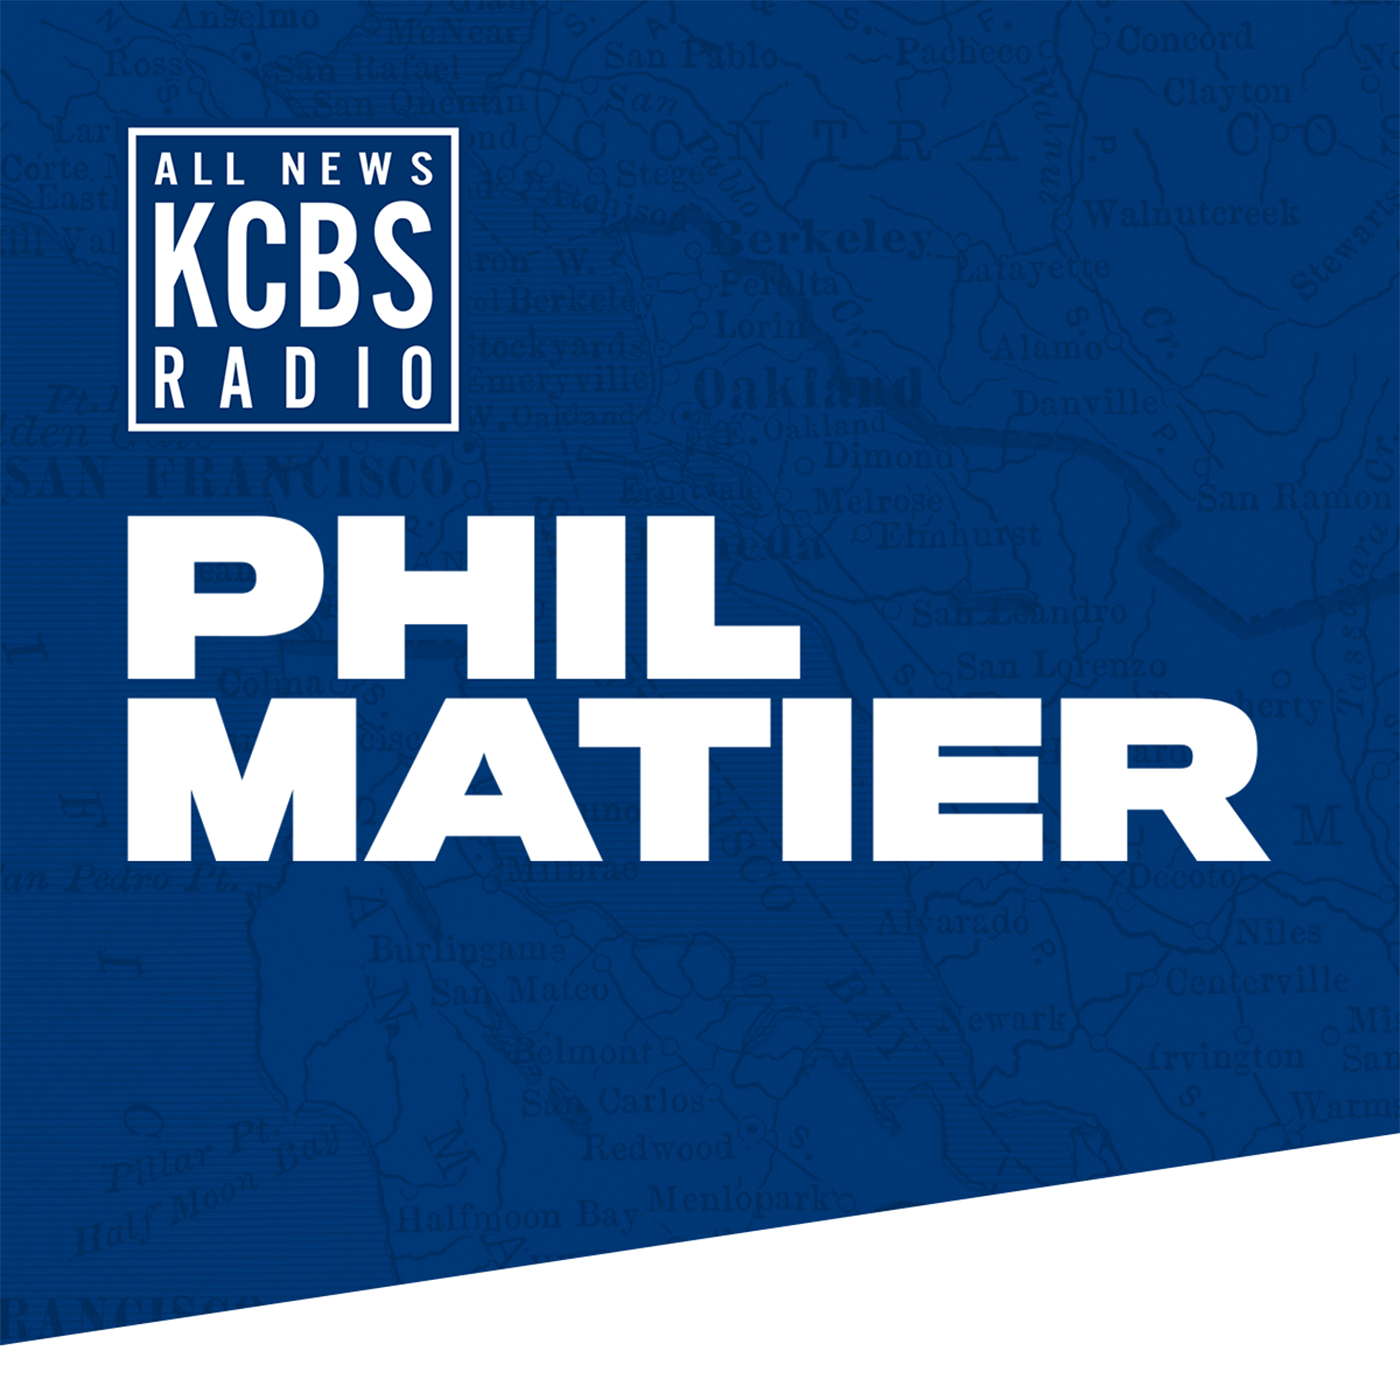 Phil Matier: Mayor London Breed's plan to address the rising crimes in San Francisco